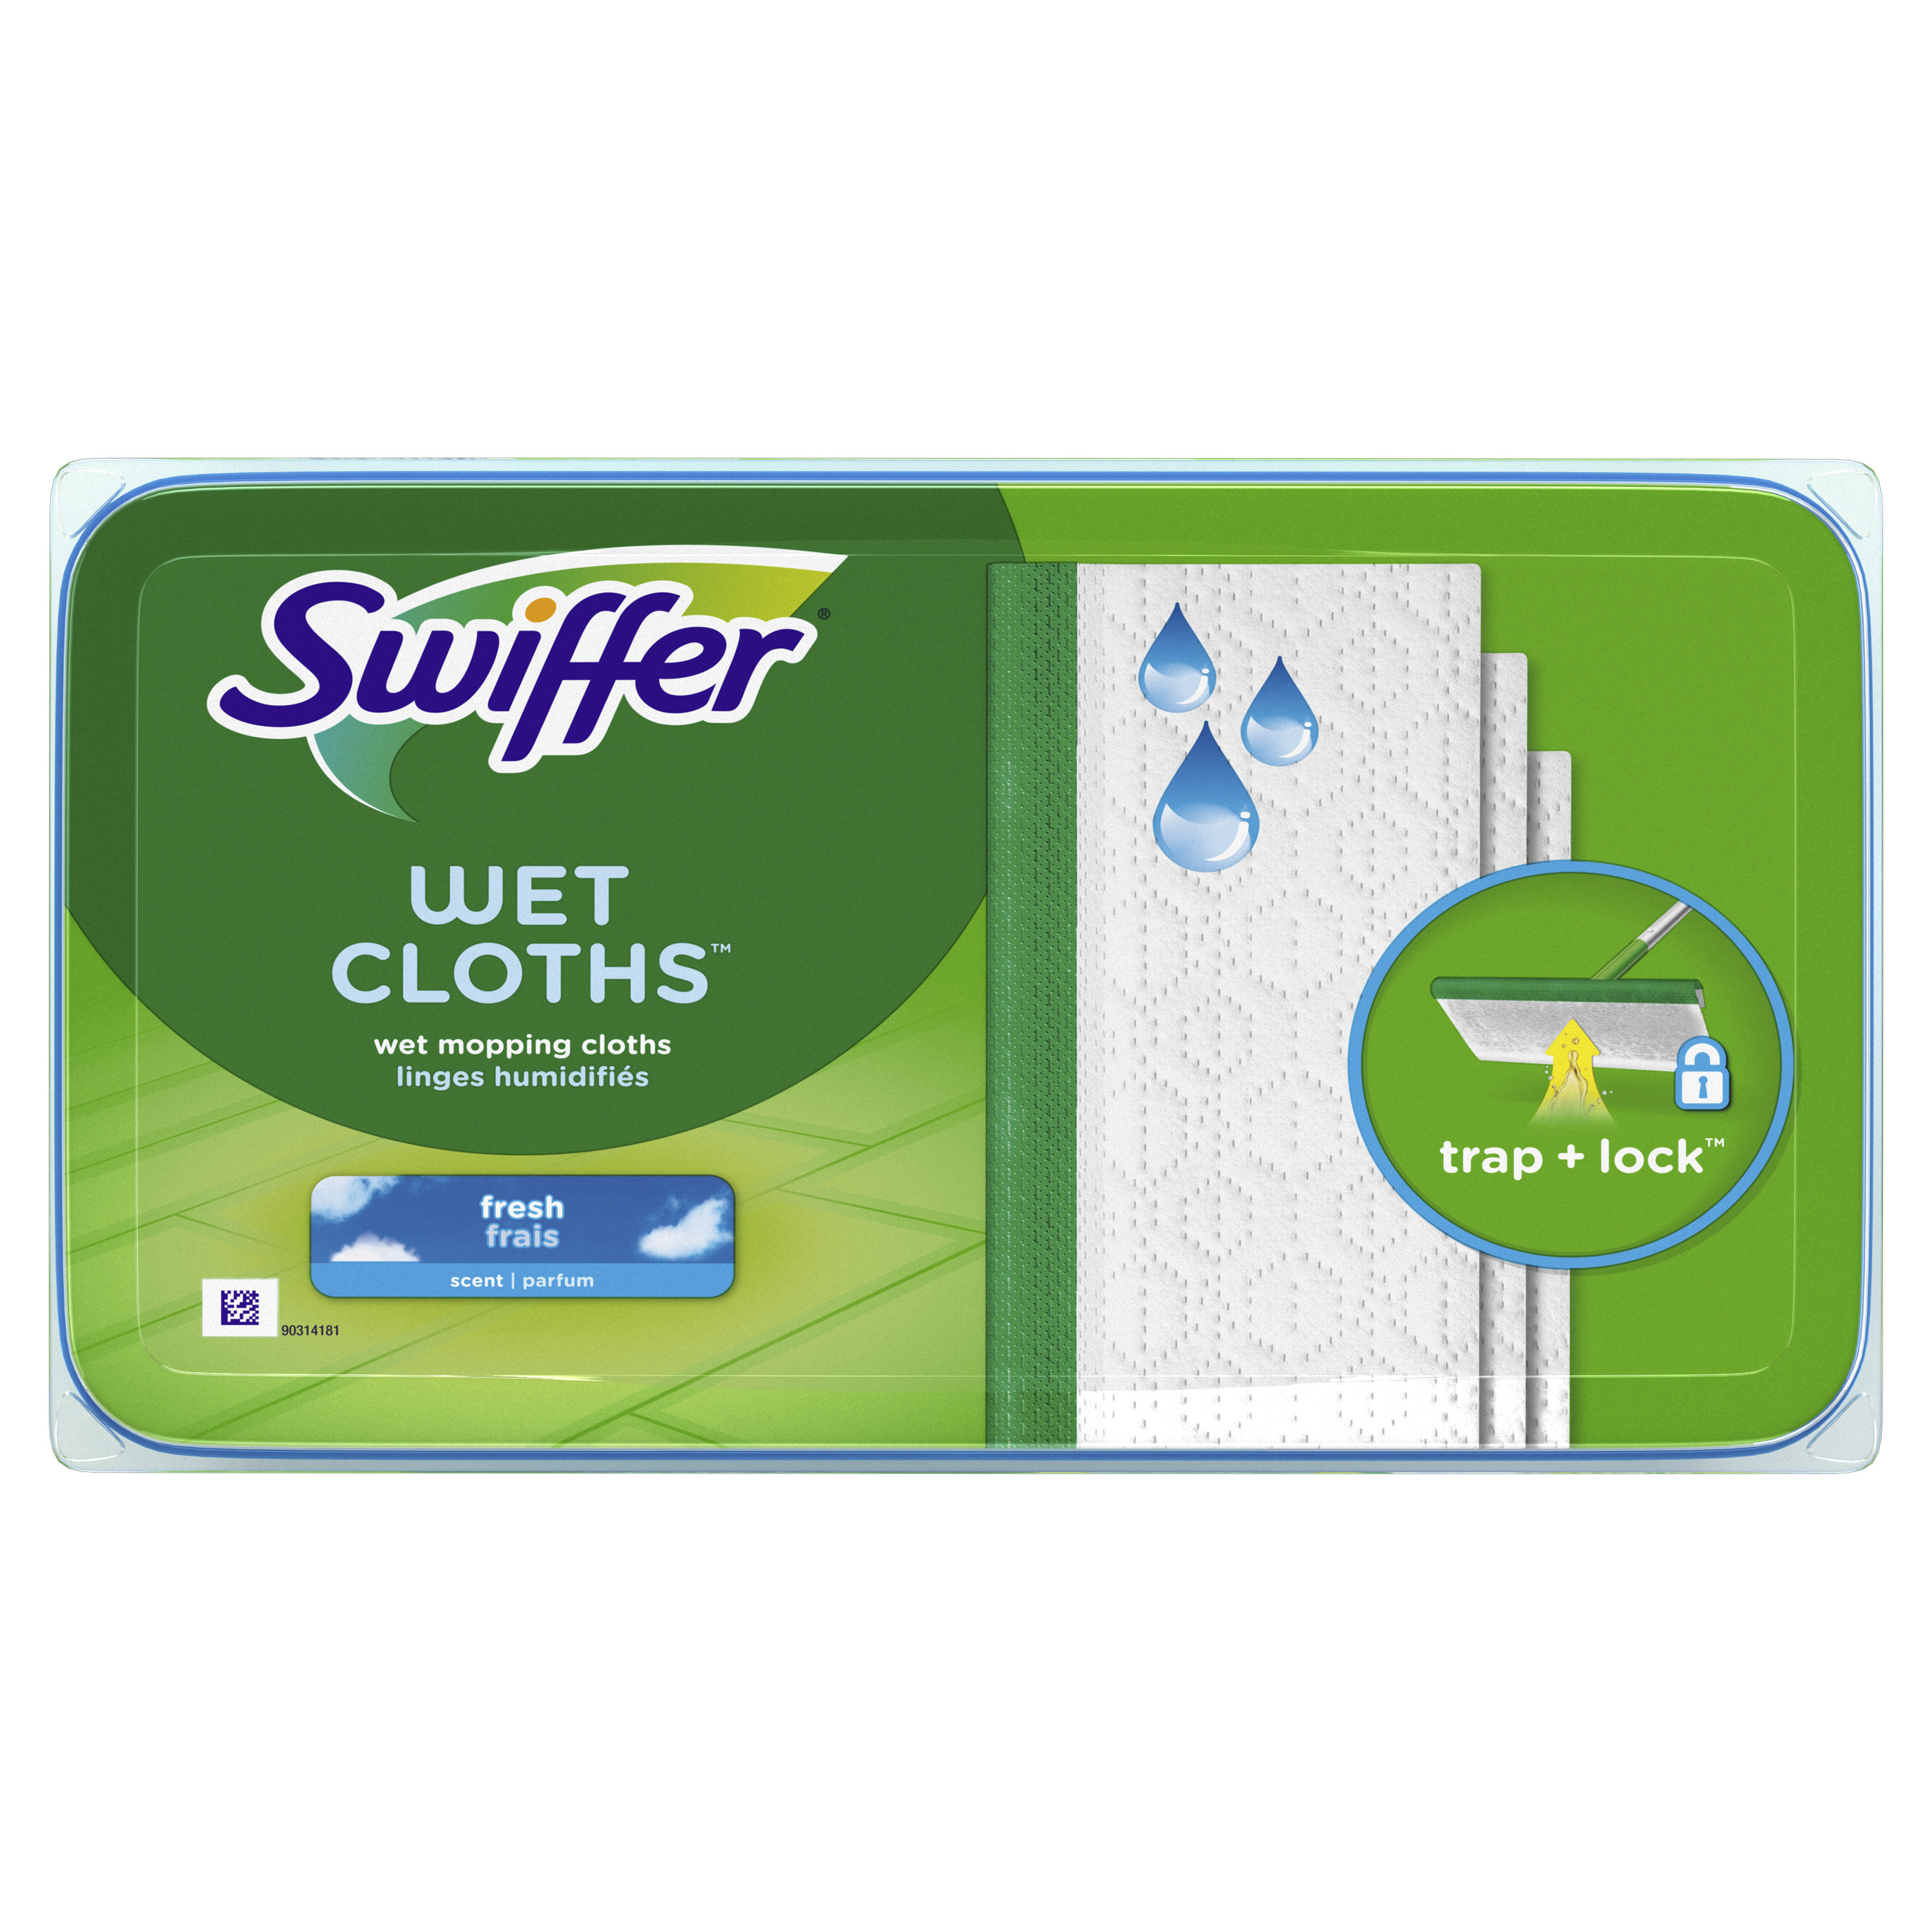 Swiffer Sweeper Wet Mopping Cloths, Multi-Surface Floor Cleaner, Fresh Scent, 24 Count - image 1 of 16